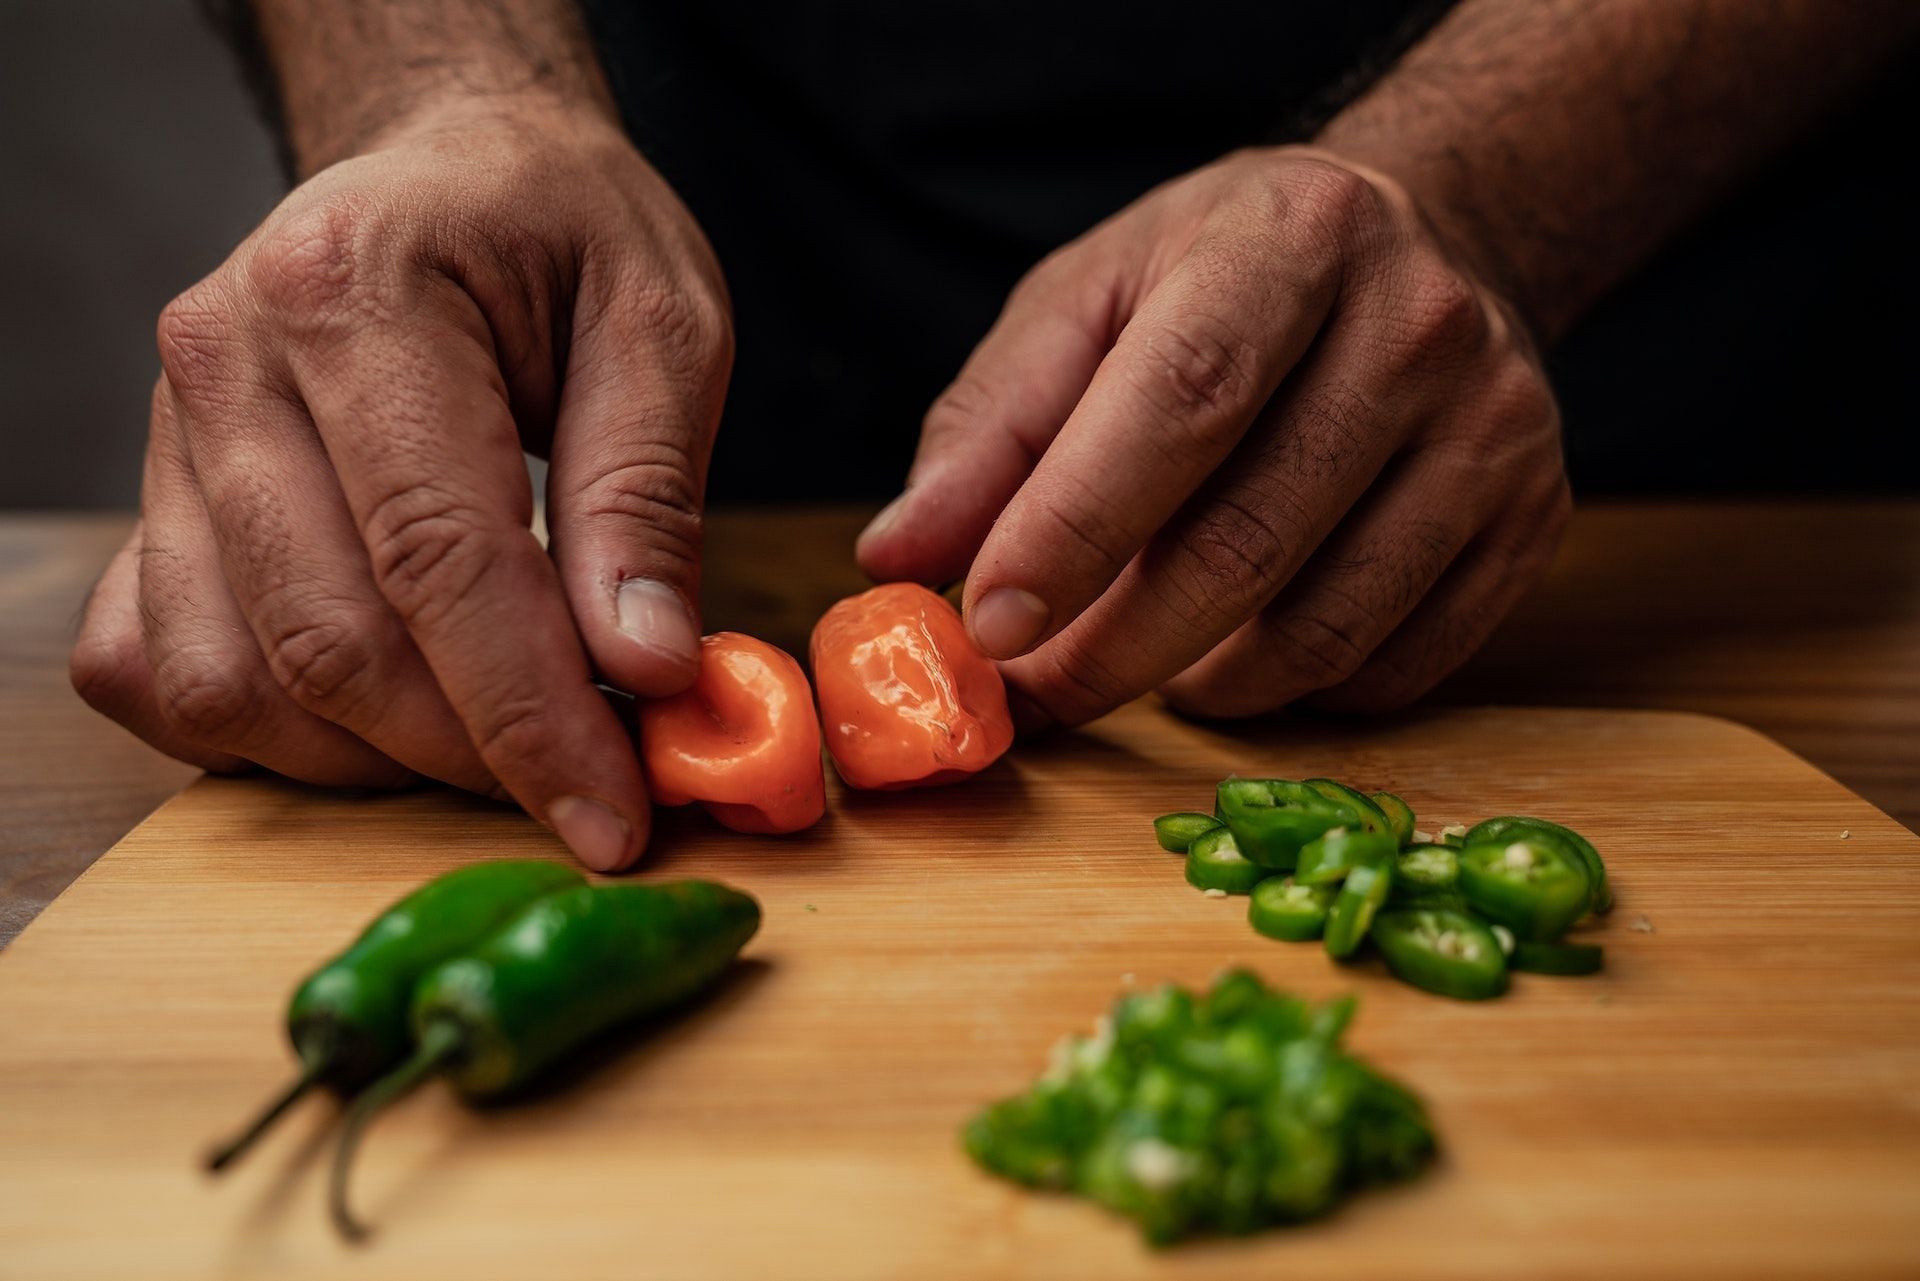 Eating spicy food is an effective remedy for a runny nose. (Photo via Pexels/Los Muertos Crew)